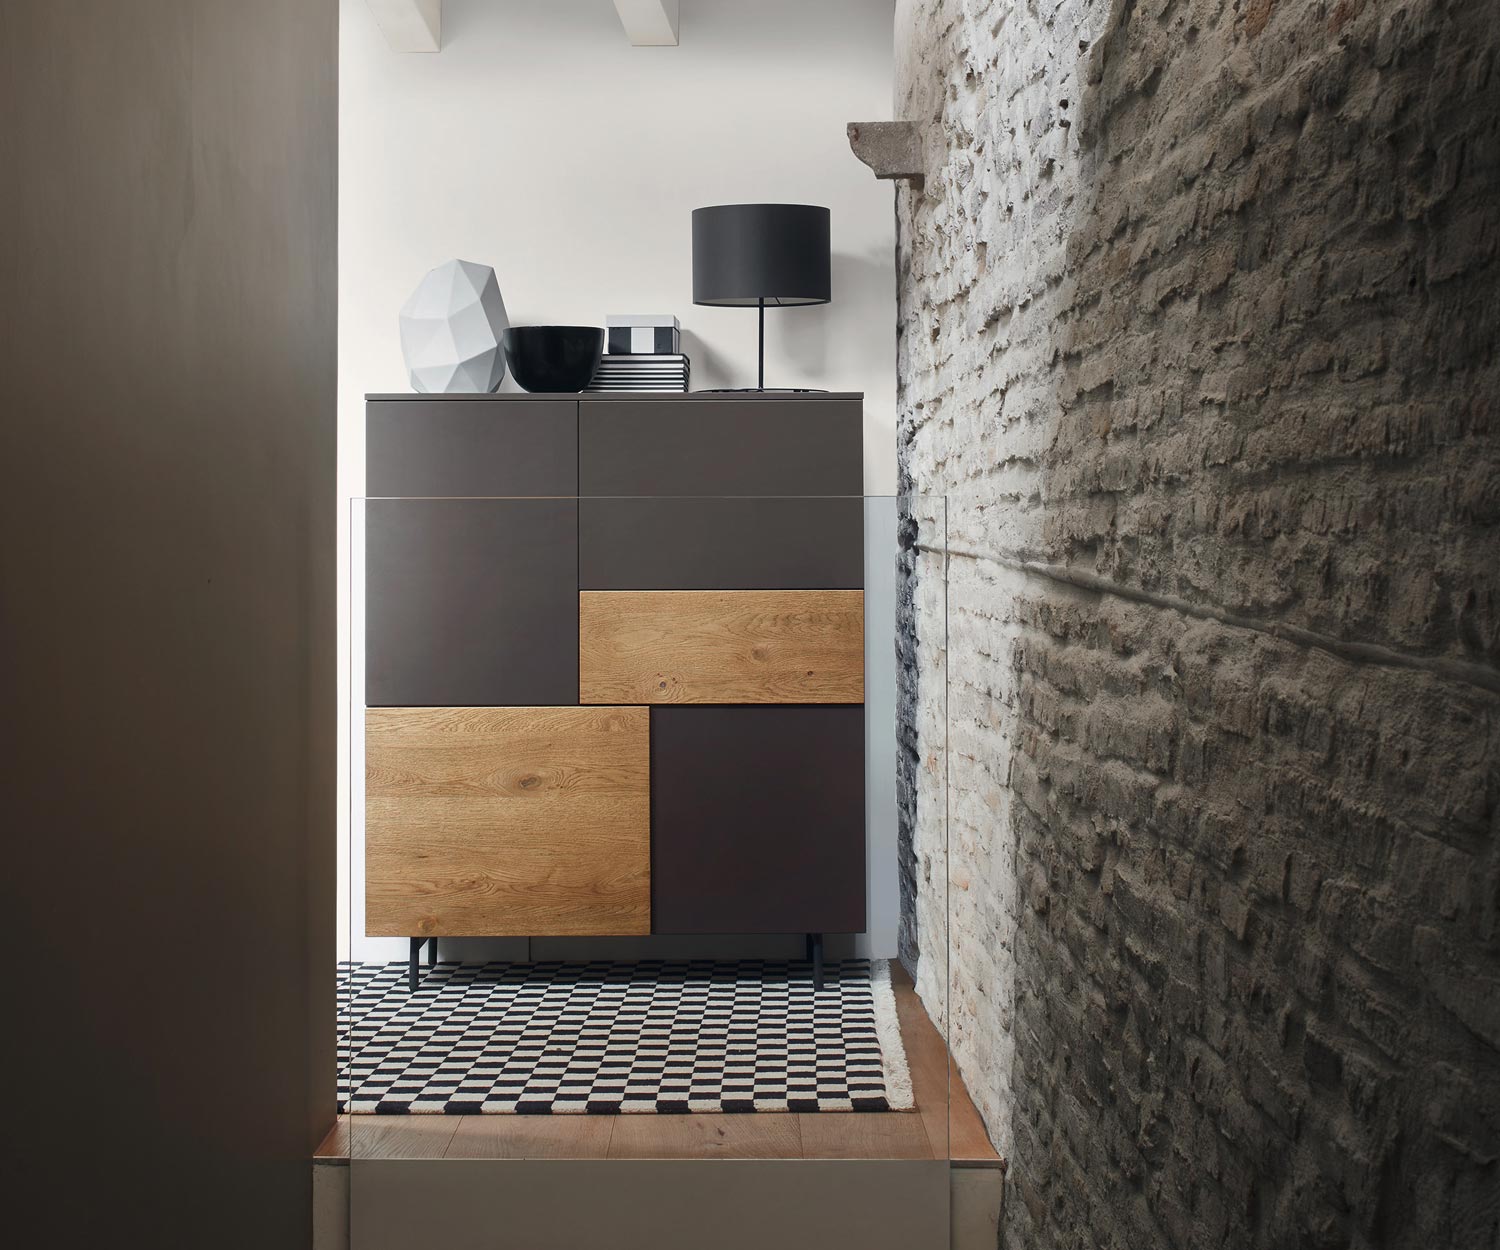 Exclusive Livitalia Design highboard Incontro with drawers and doors without handles